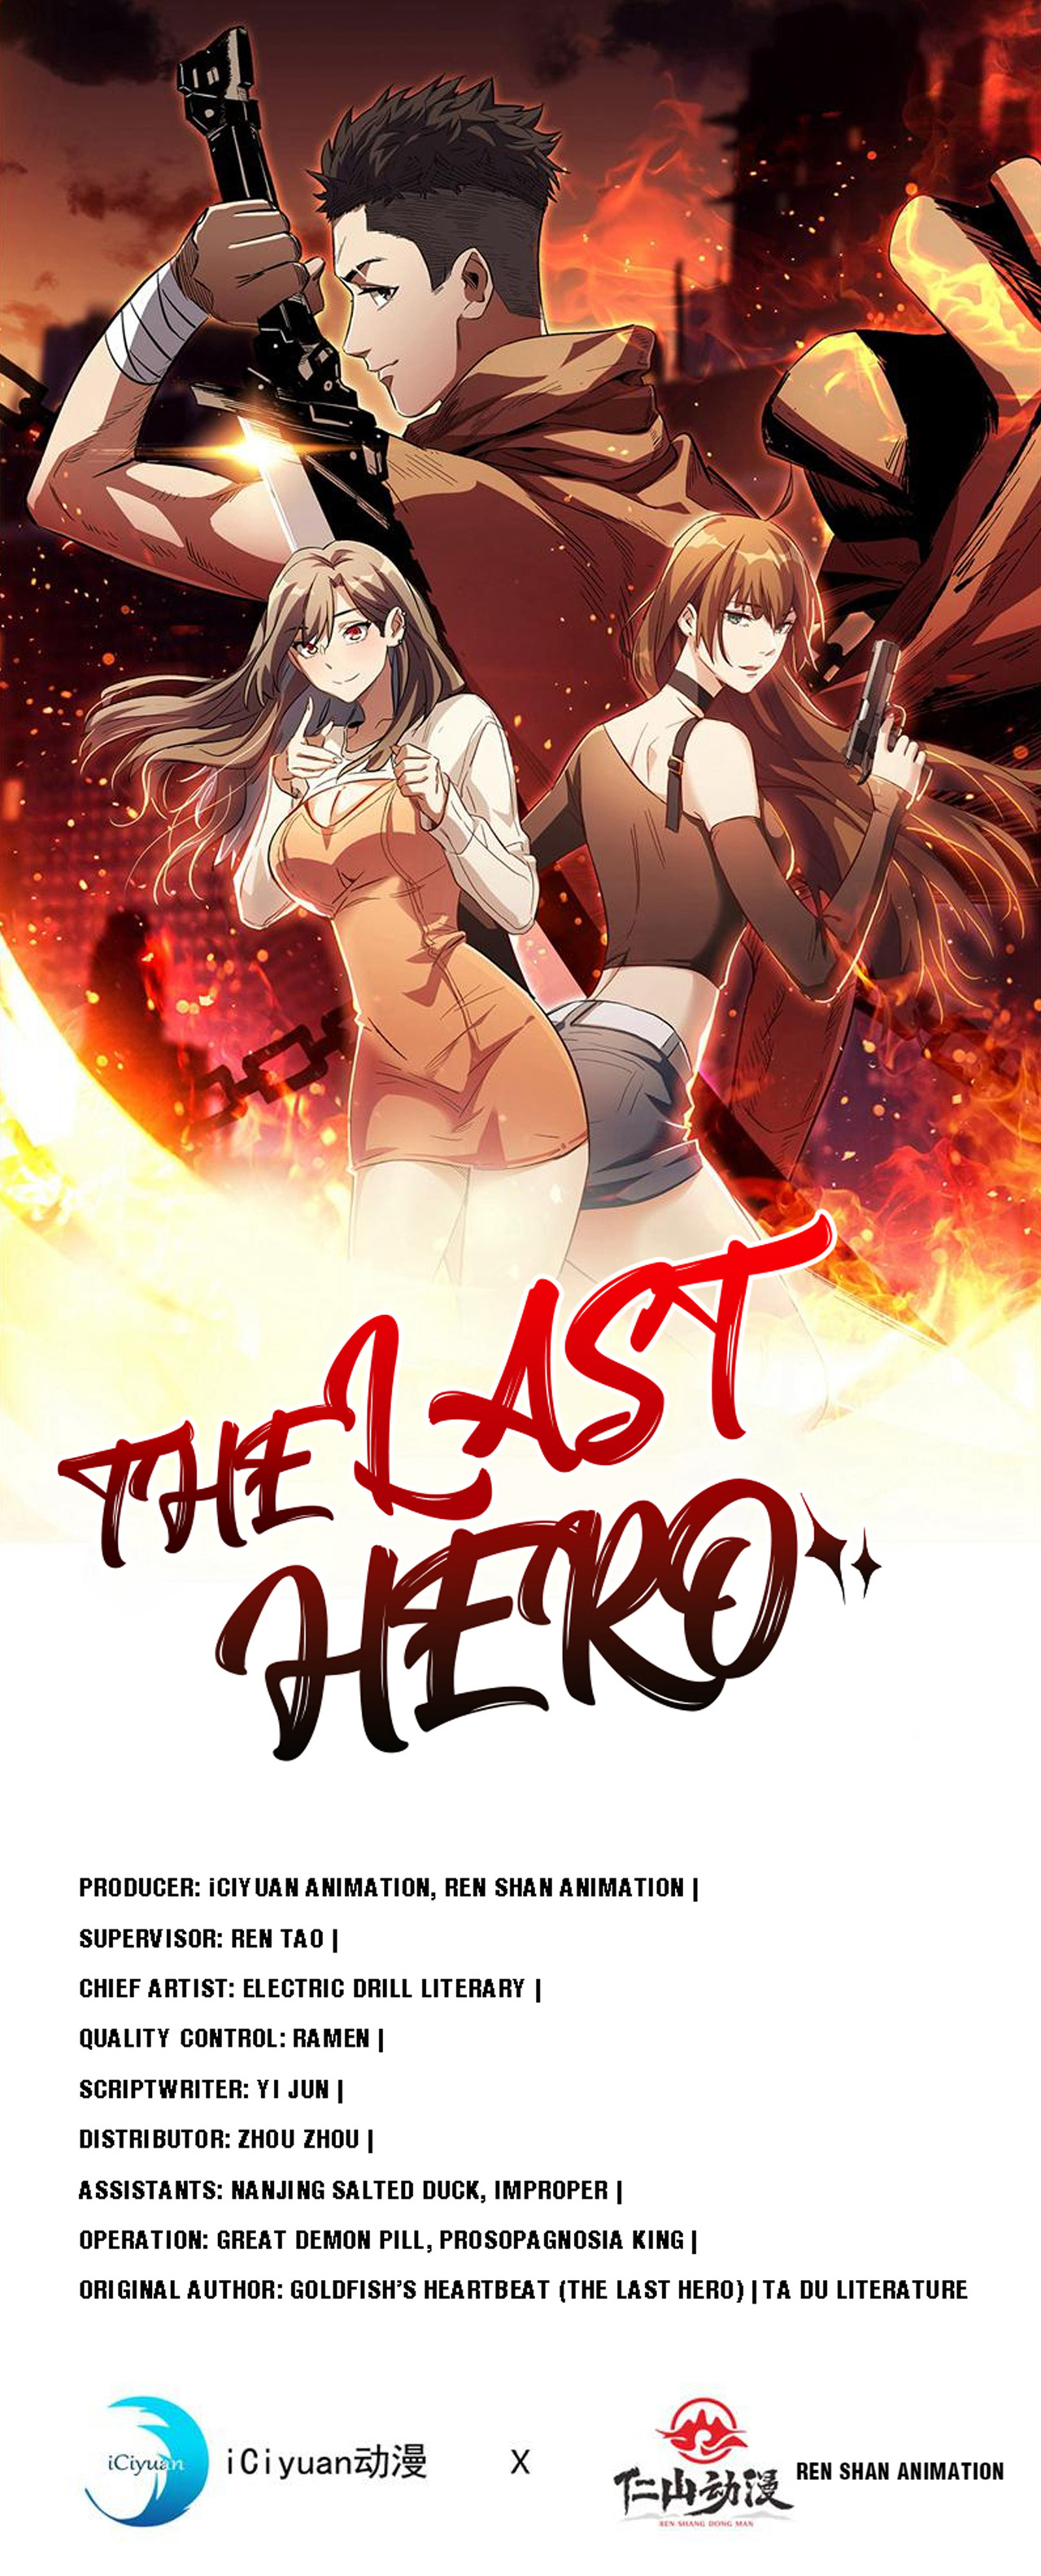 The Last Hero, I Am Picking up Attributes and Items in Last Days 144